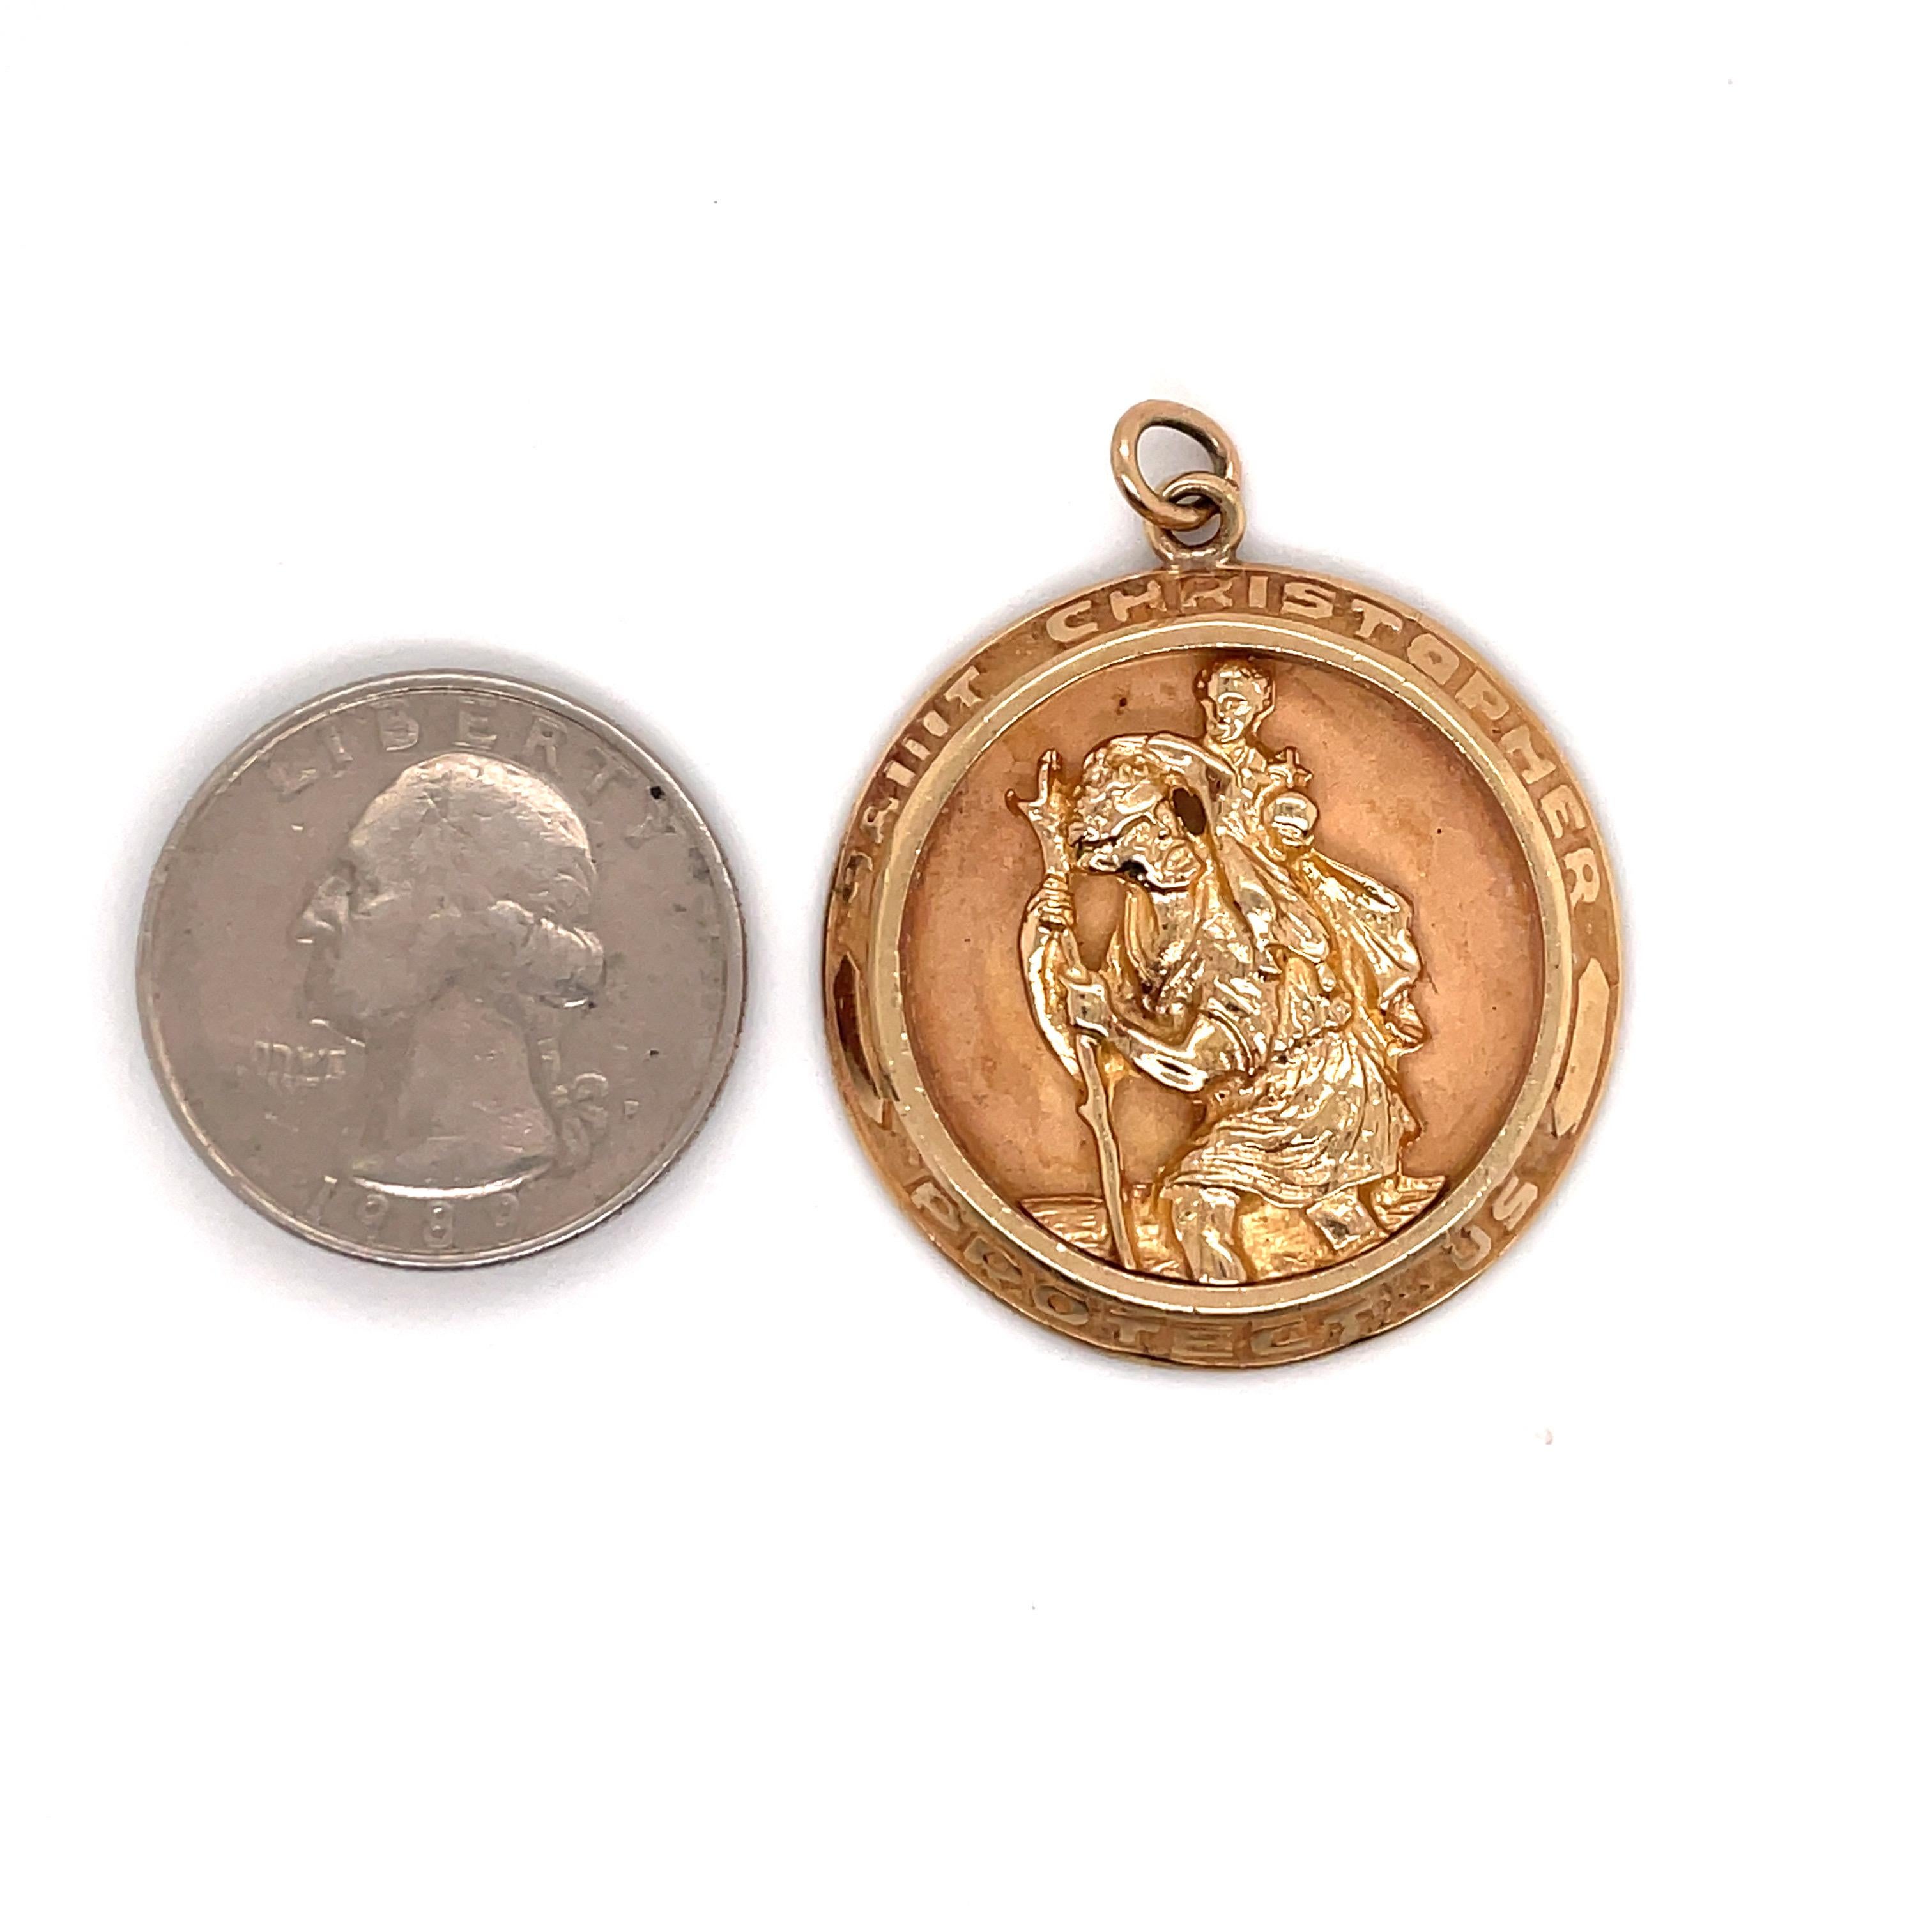 14 Karat Yellow gold vintage pendant featuring Saint Christopher weighing 13.7 grams, 2.25 inches. 
Other Saints pendant are available. 
DM for pricing.
